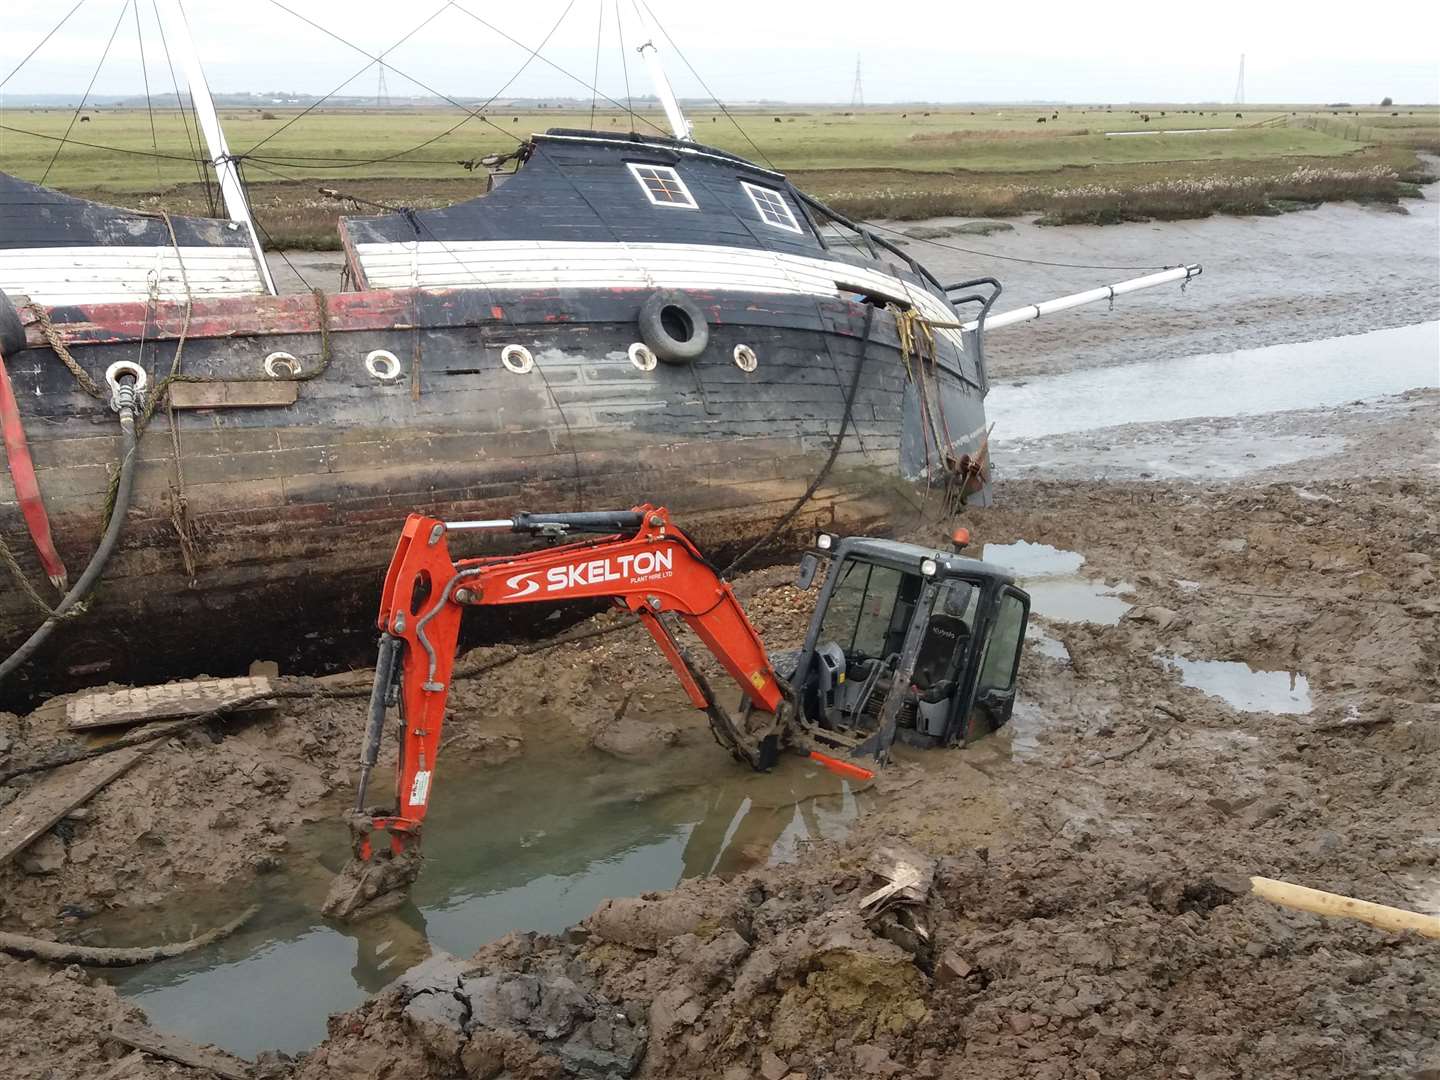 The digger brought in to rescue the Revenge from where it ran aground in Faversham Creek sunk into the mud